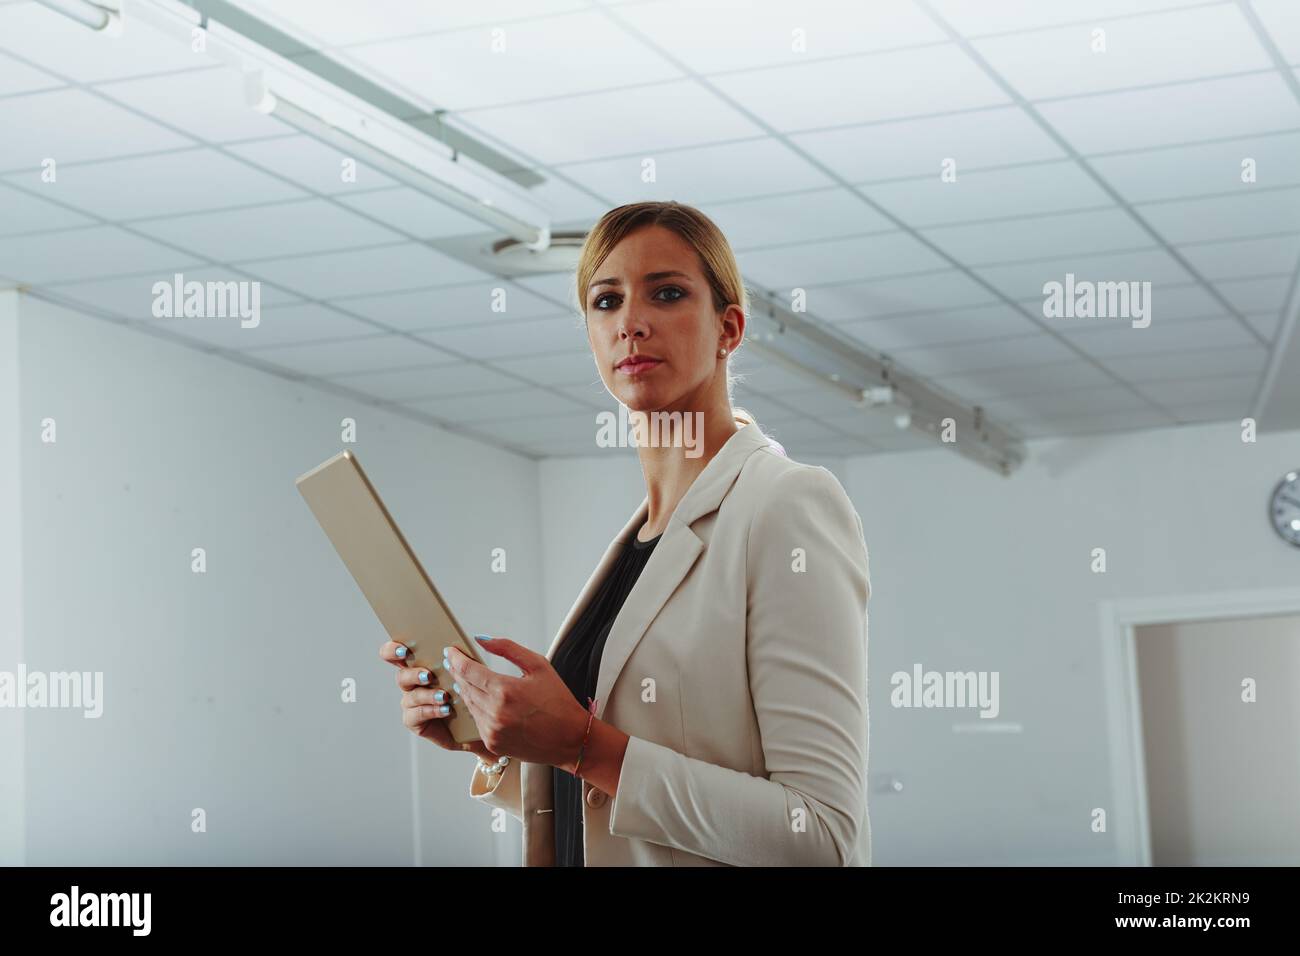 Smart stylish businesswoman or manageress holding a tablet pc Stock Photo